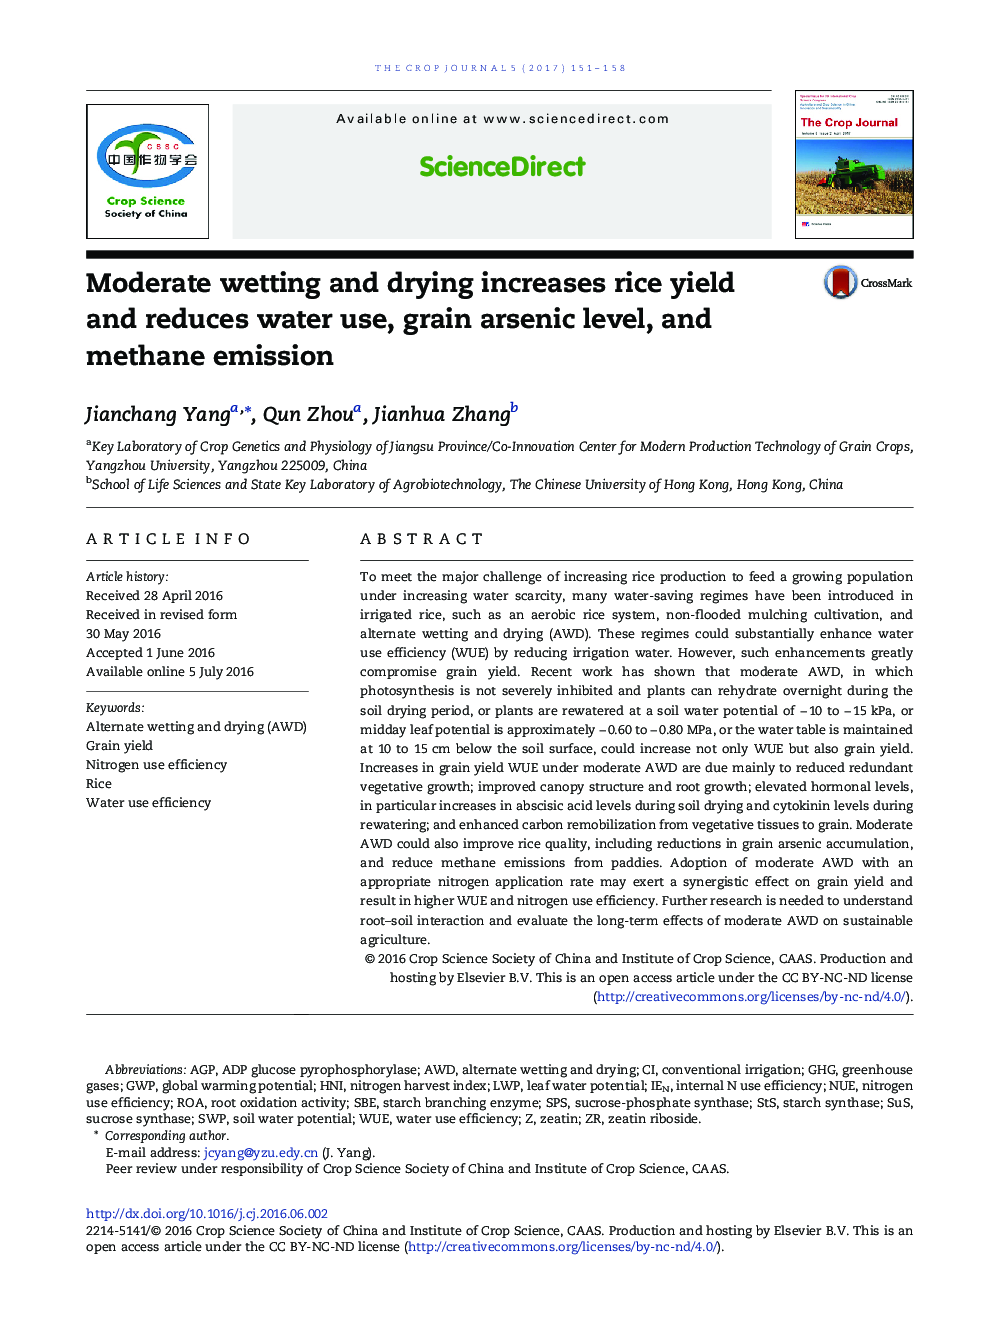 Moderate wetting and drying increases rice yield and reduces water use, grain arsenic level, and methane emission